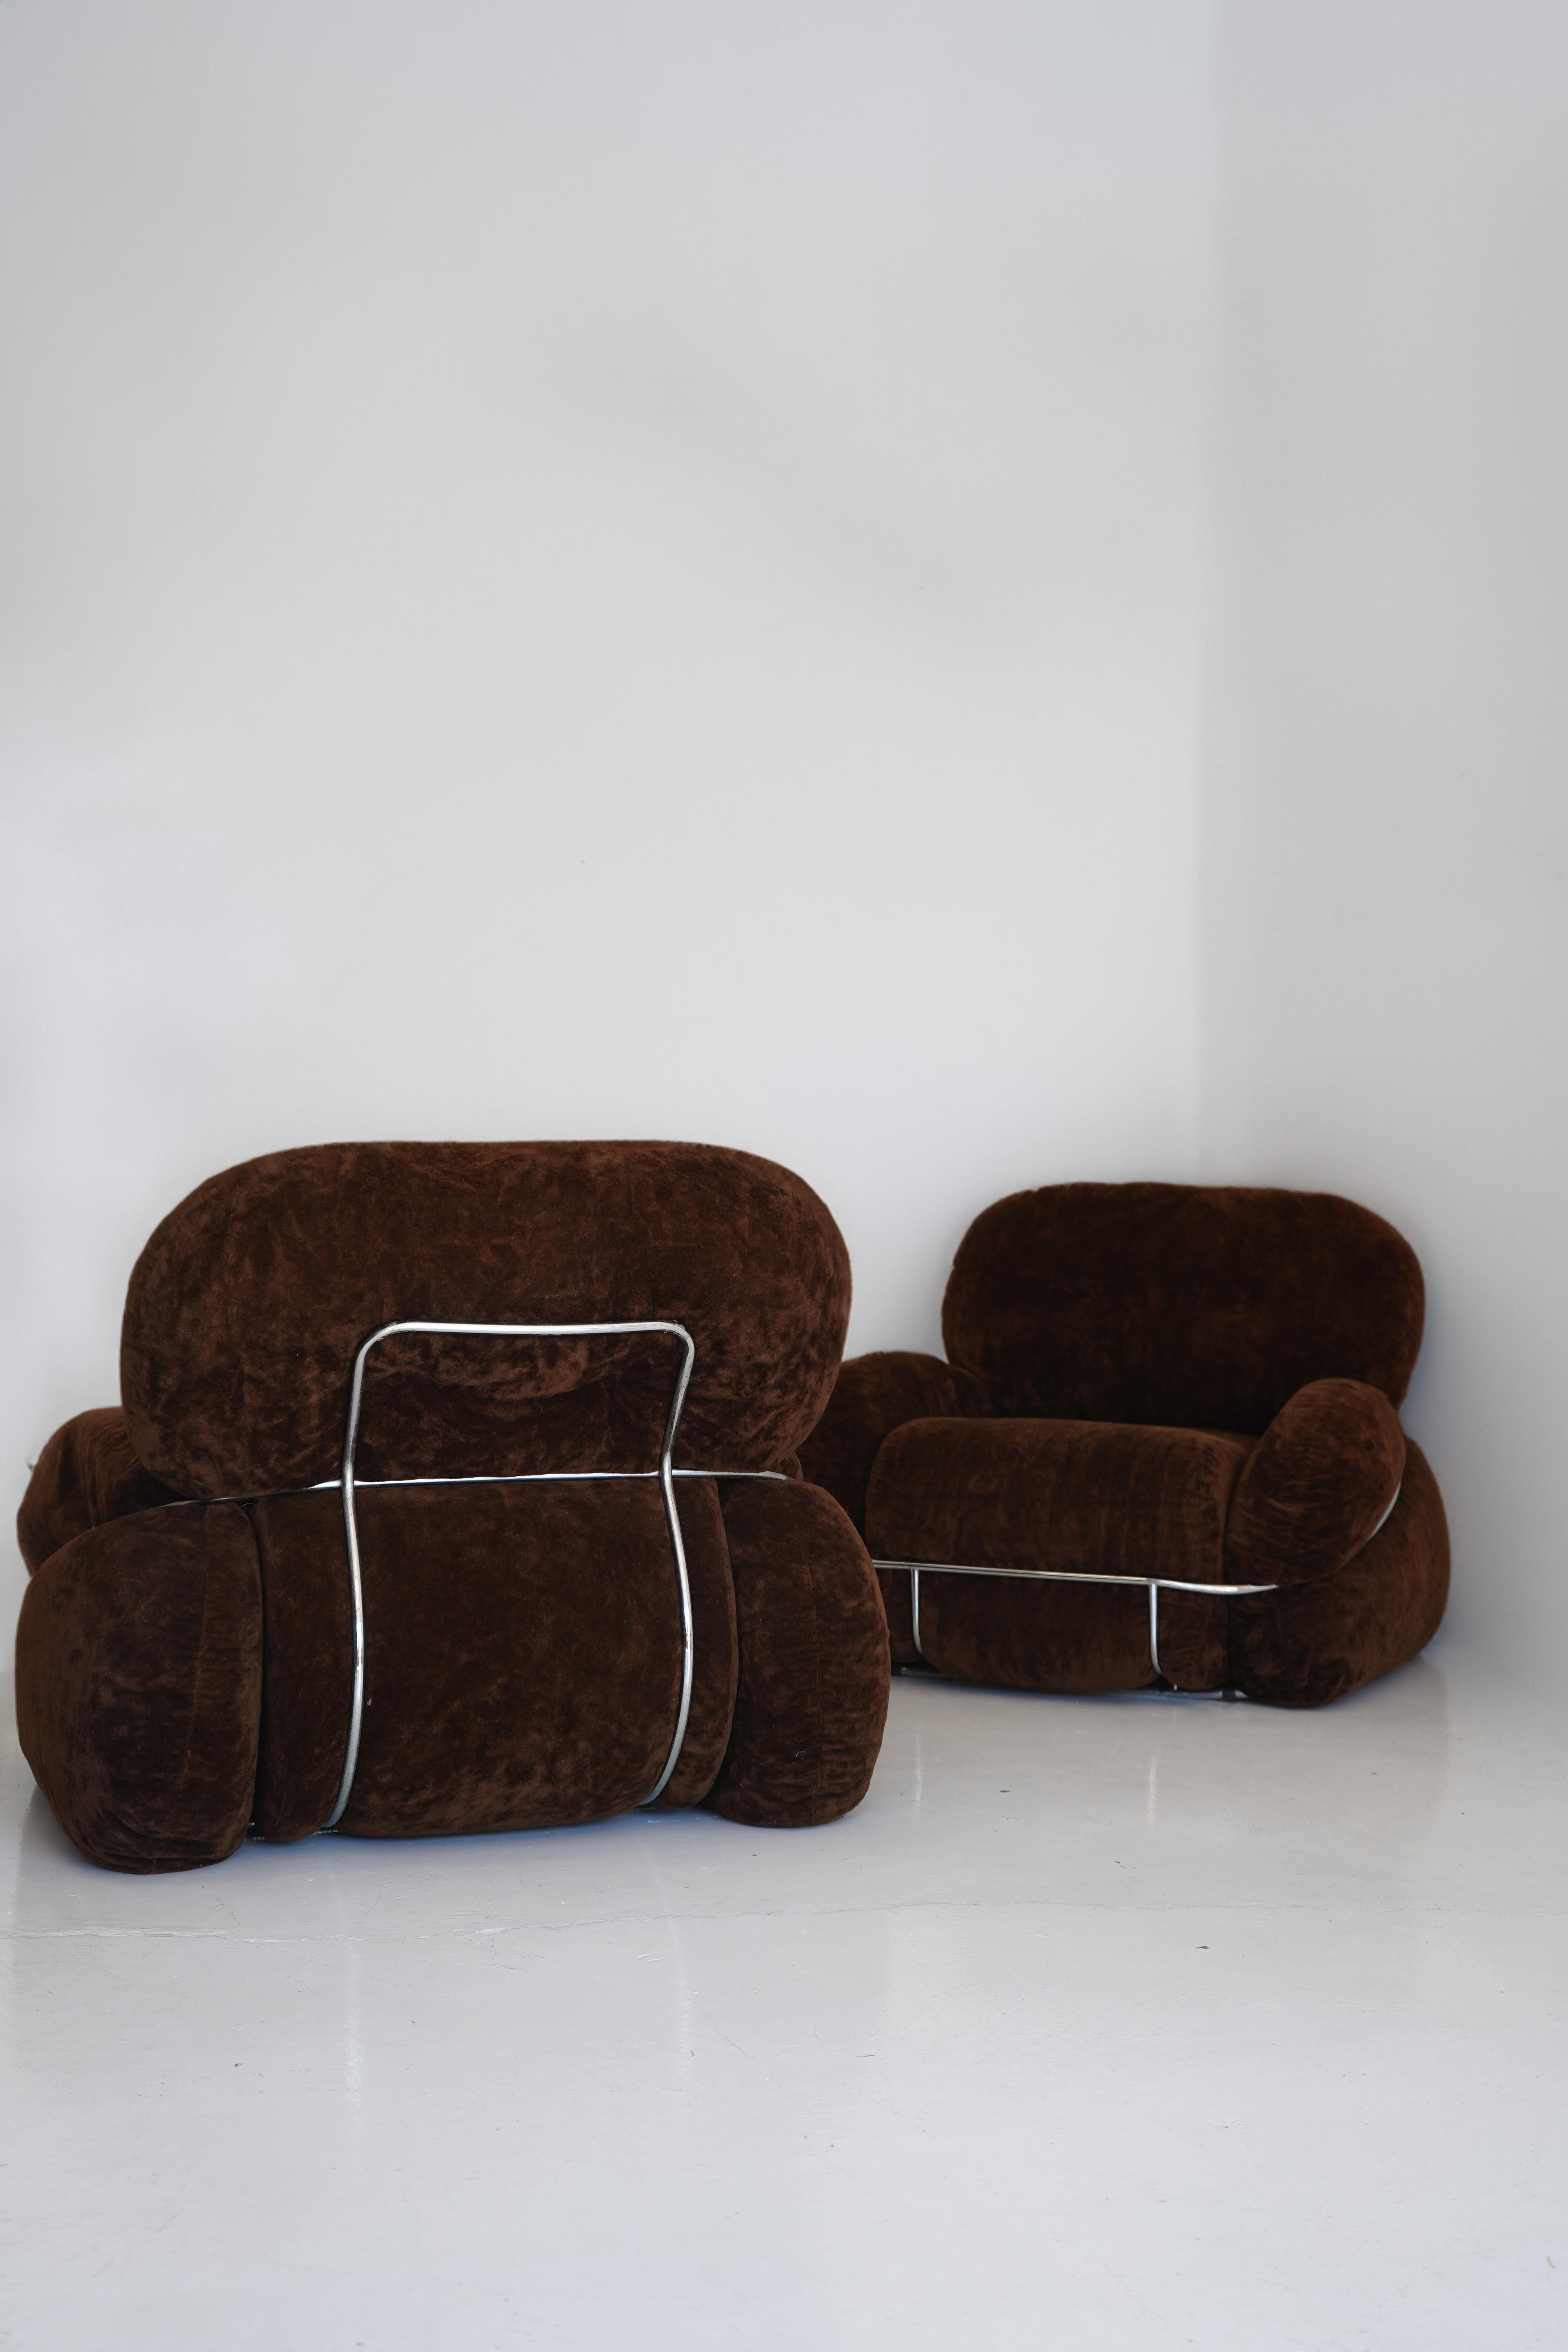 Space Age Pair of Okay Chairs by Adriano Piazzesi , Italy 1970s For Sale